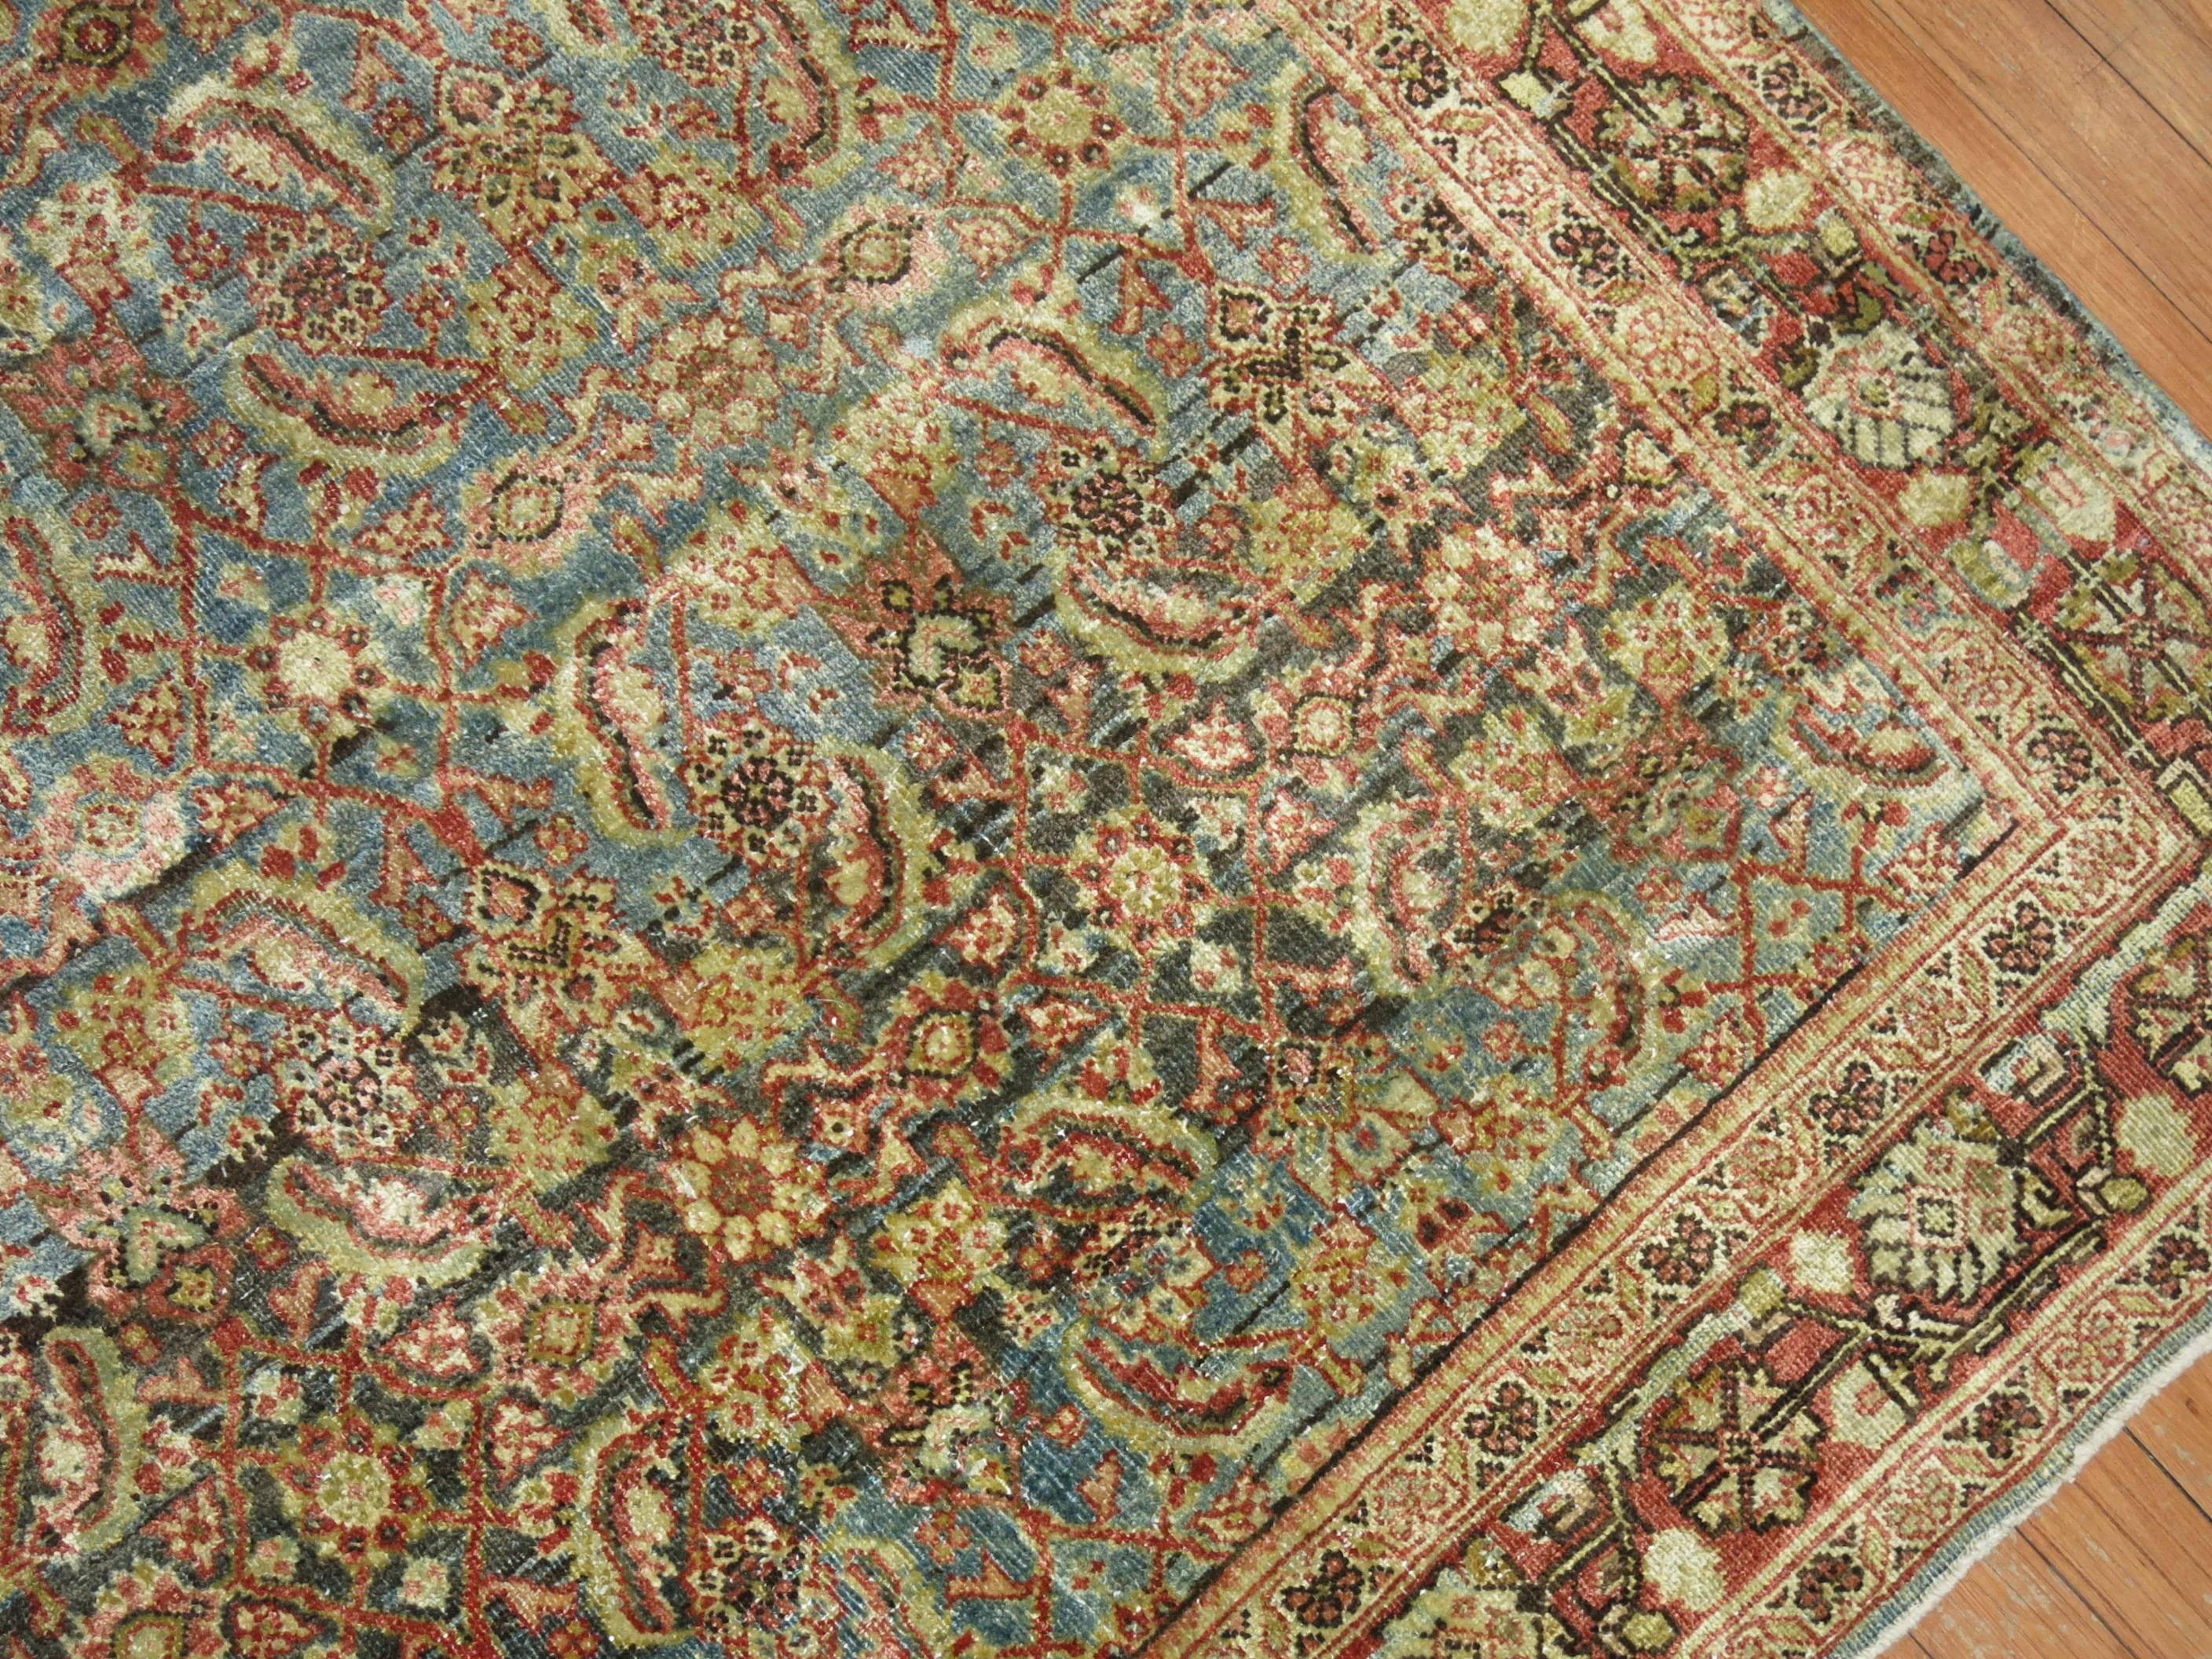 An exquisite antique Persian Mahal rug with an all-over predominant blue/gray abrashed field. Highly decorative and a timeless pattern that can be used in any type of setting.

4'3'' x 6'6''